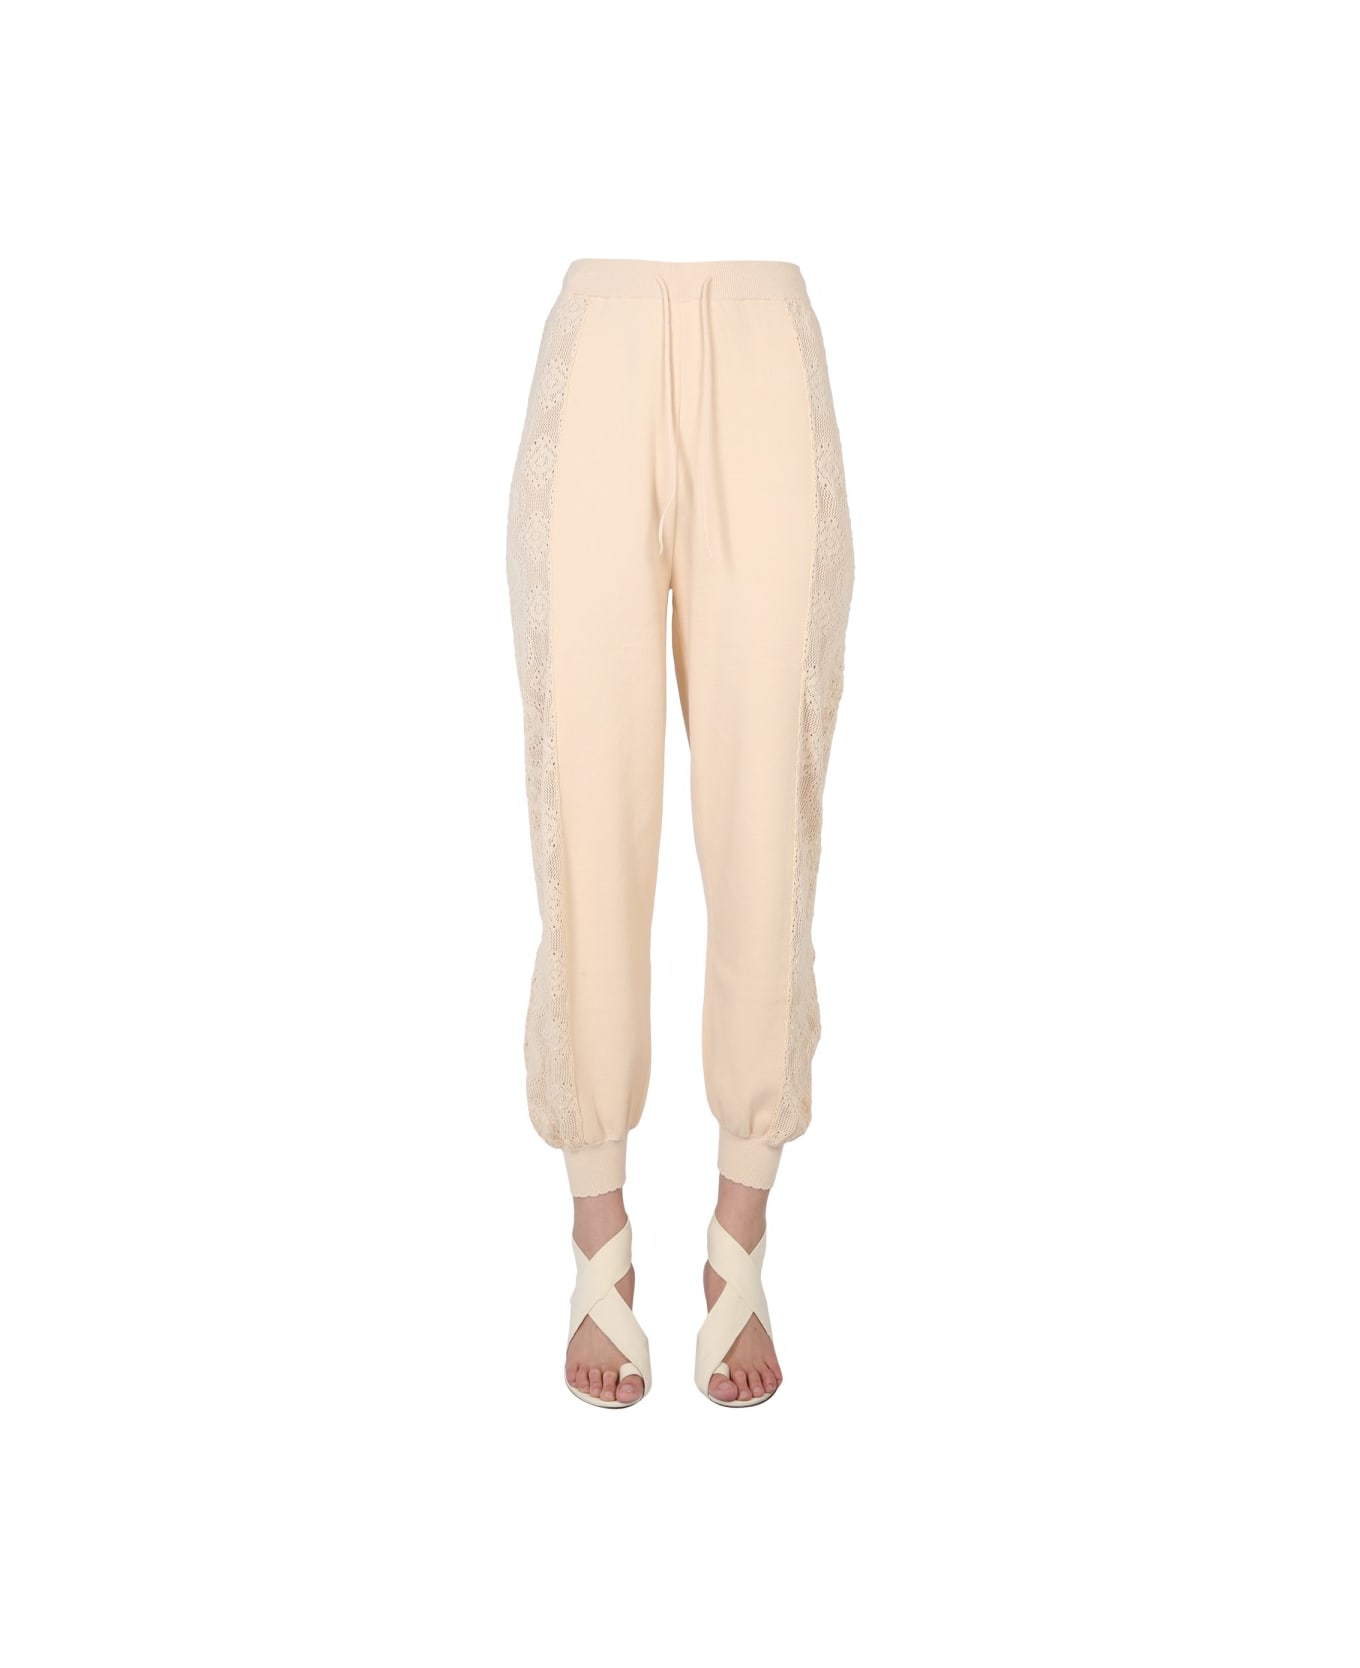 Boutique Moschino Jogging Pants - IVORY